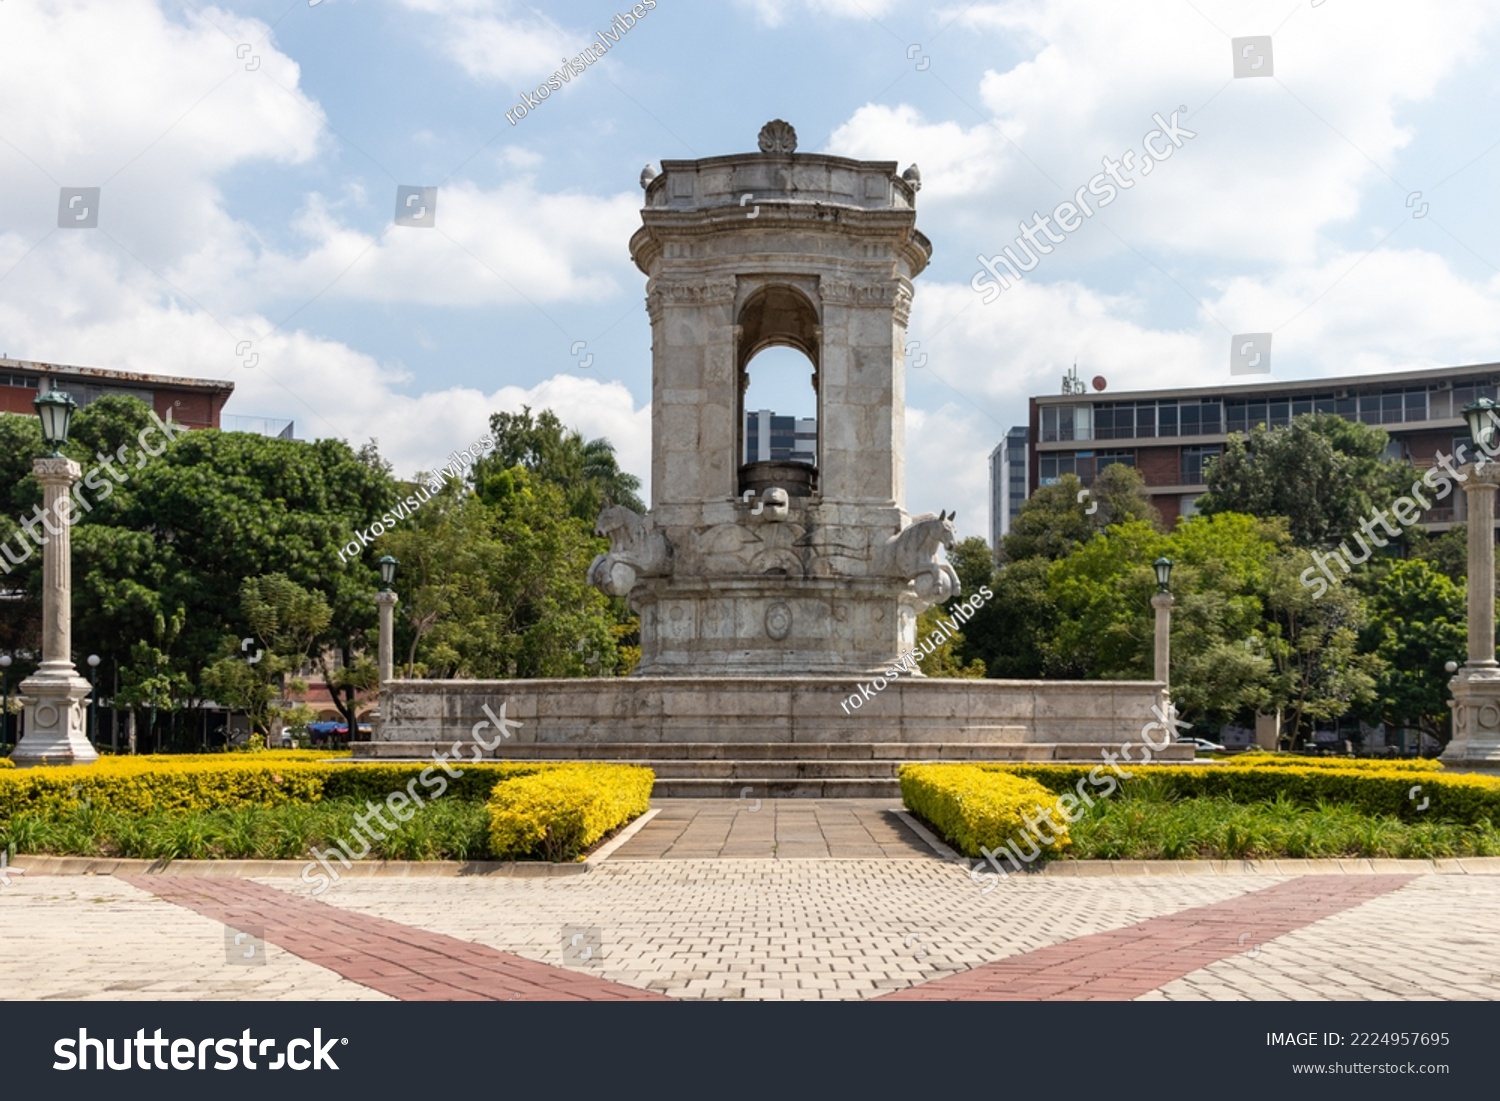 Plaza spain in guatemala city during a sunny day #2224957695